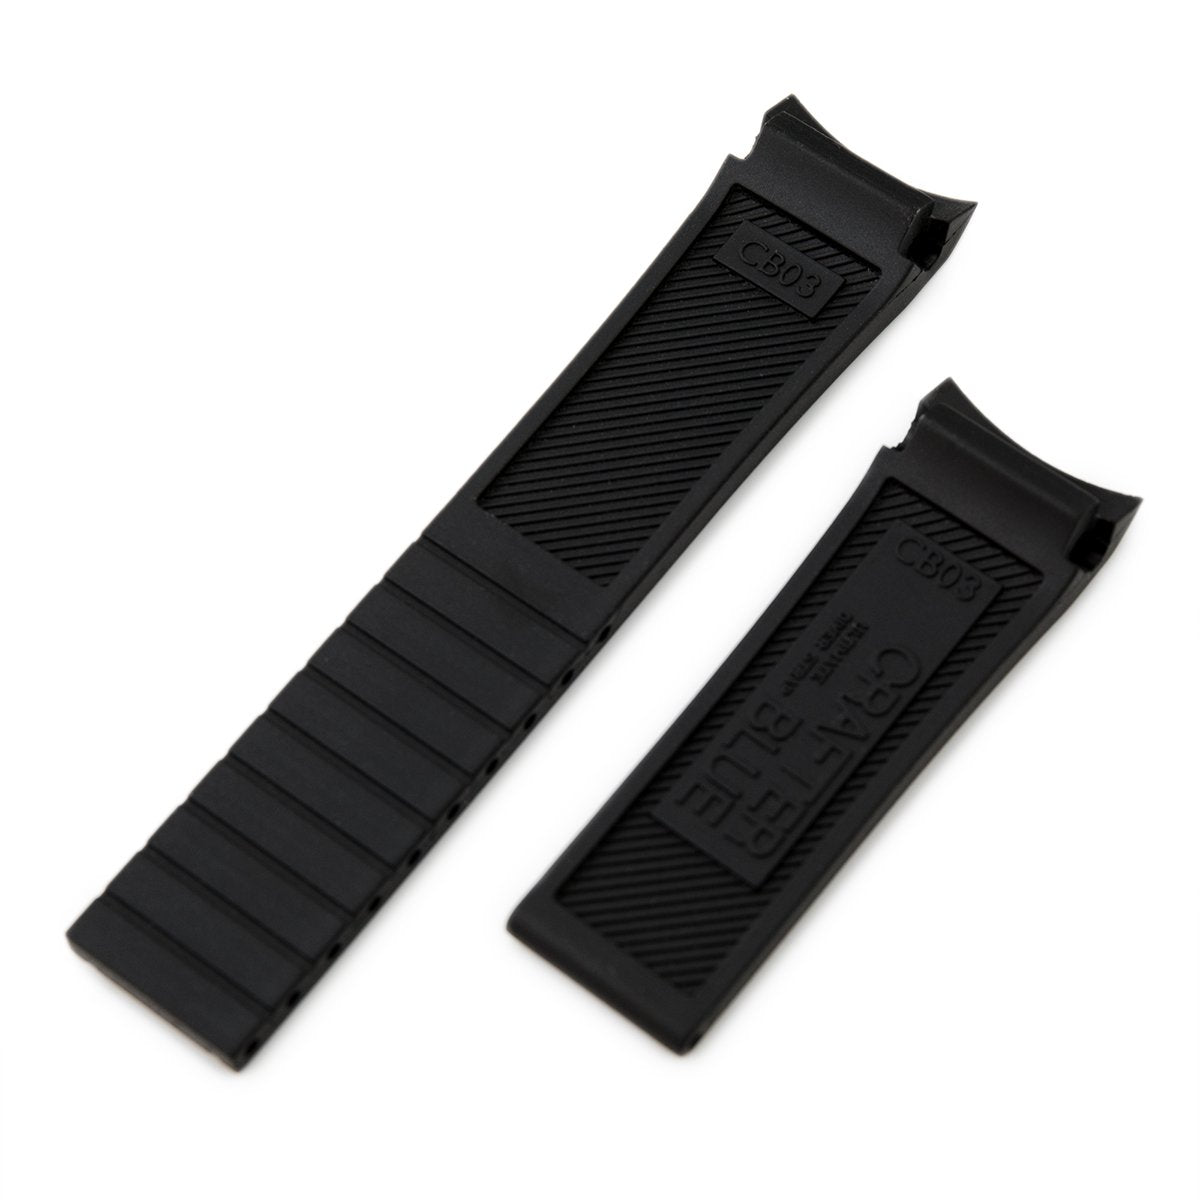 20mm Crafter Blue Black Rubber Curved Lug Watch Band for Seiko MM300 Prospex Marinemaster SBDX001 Strapcode Watch Bands